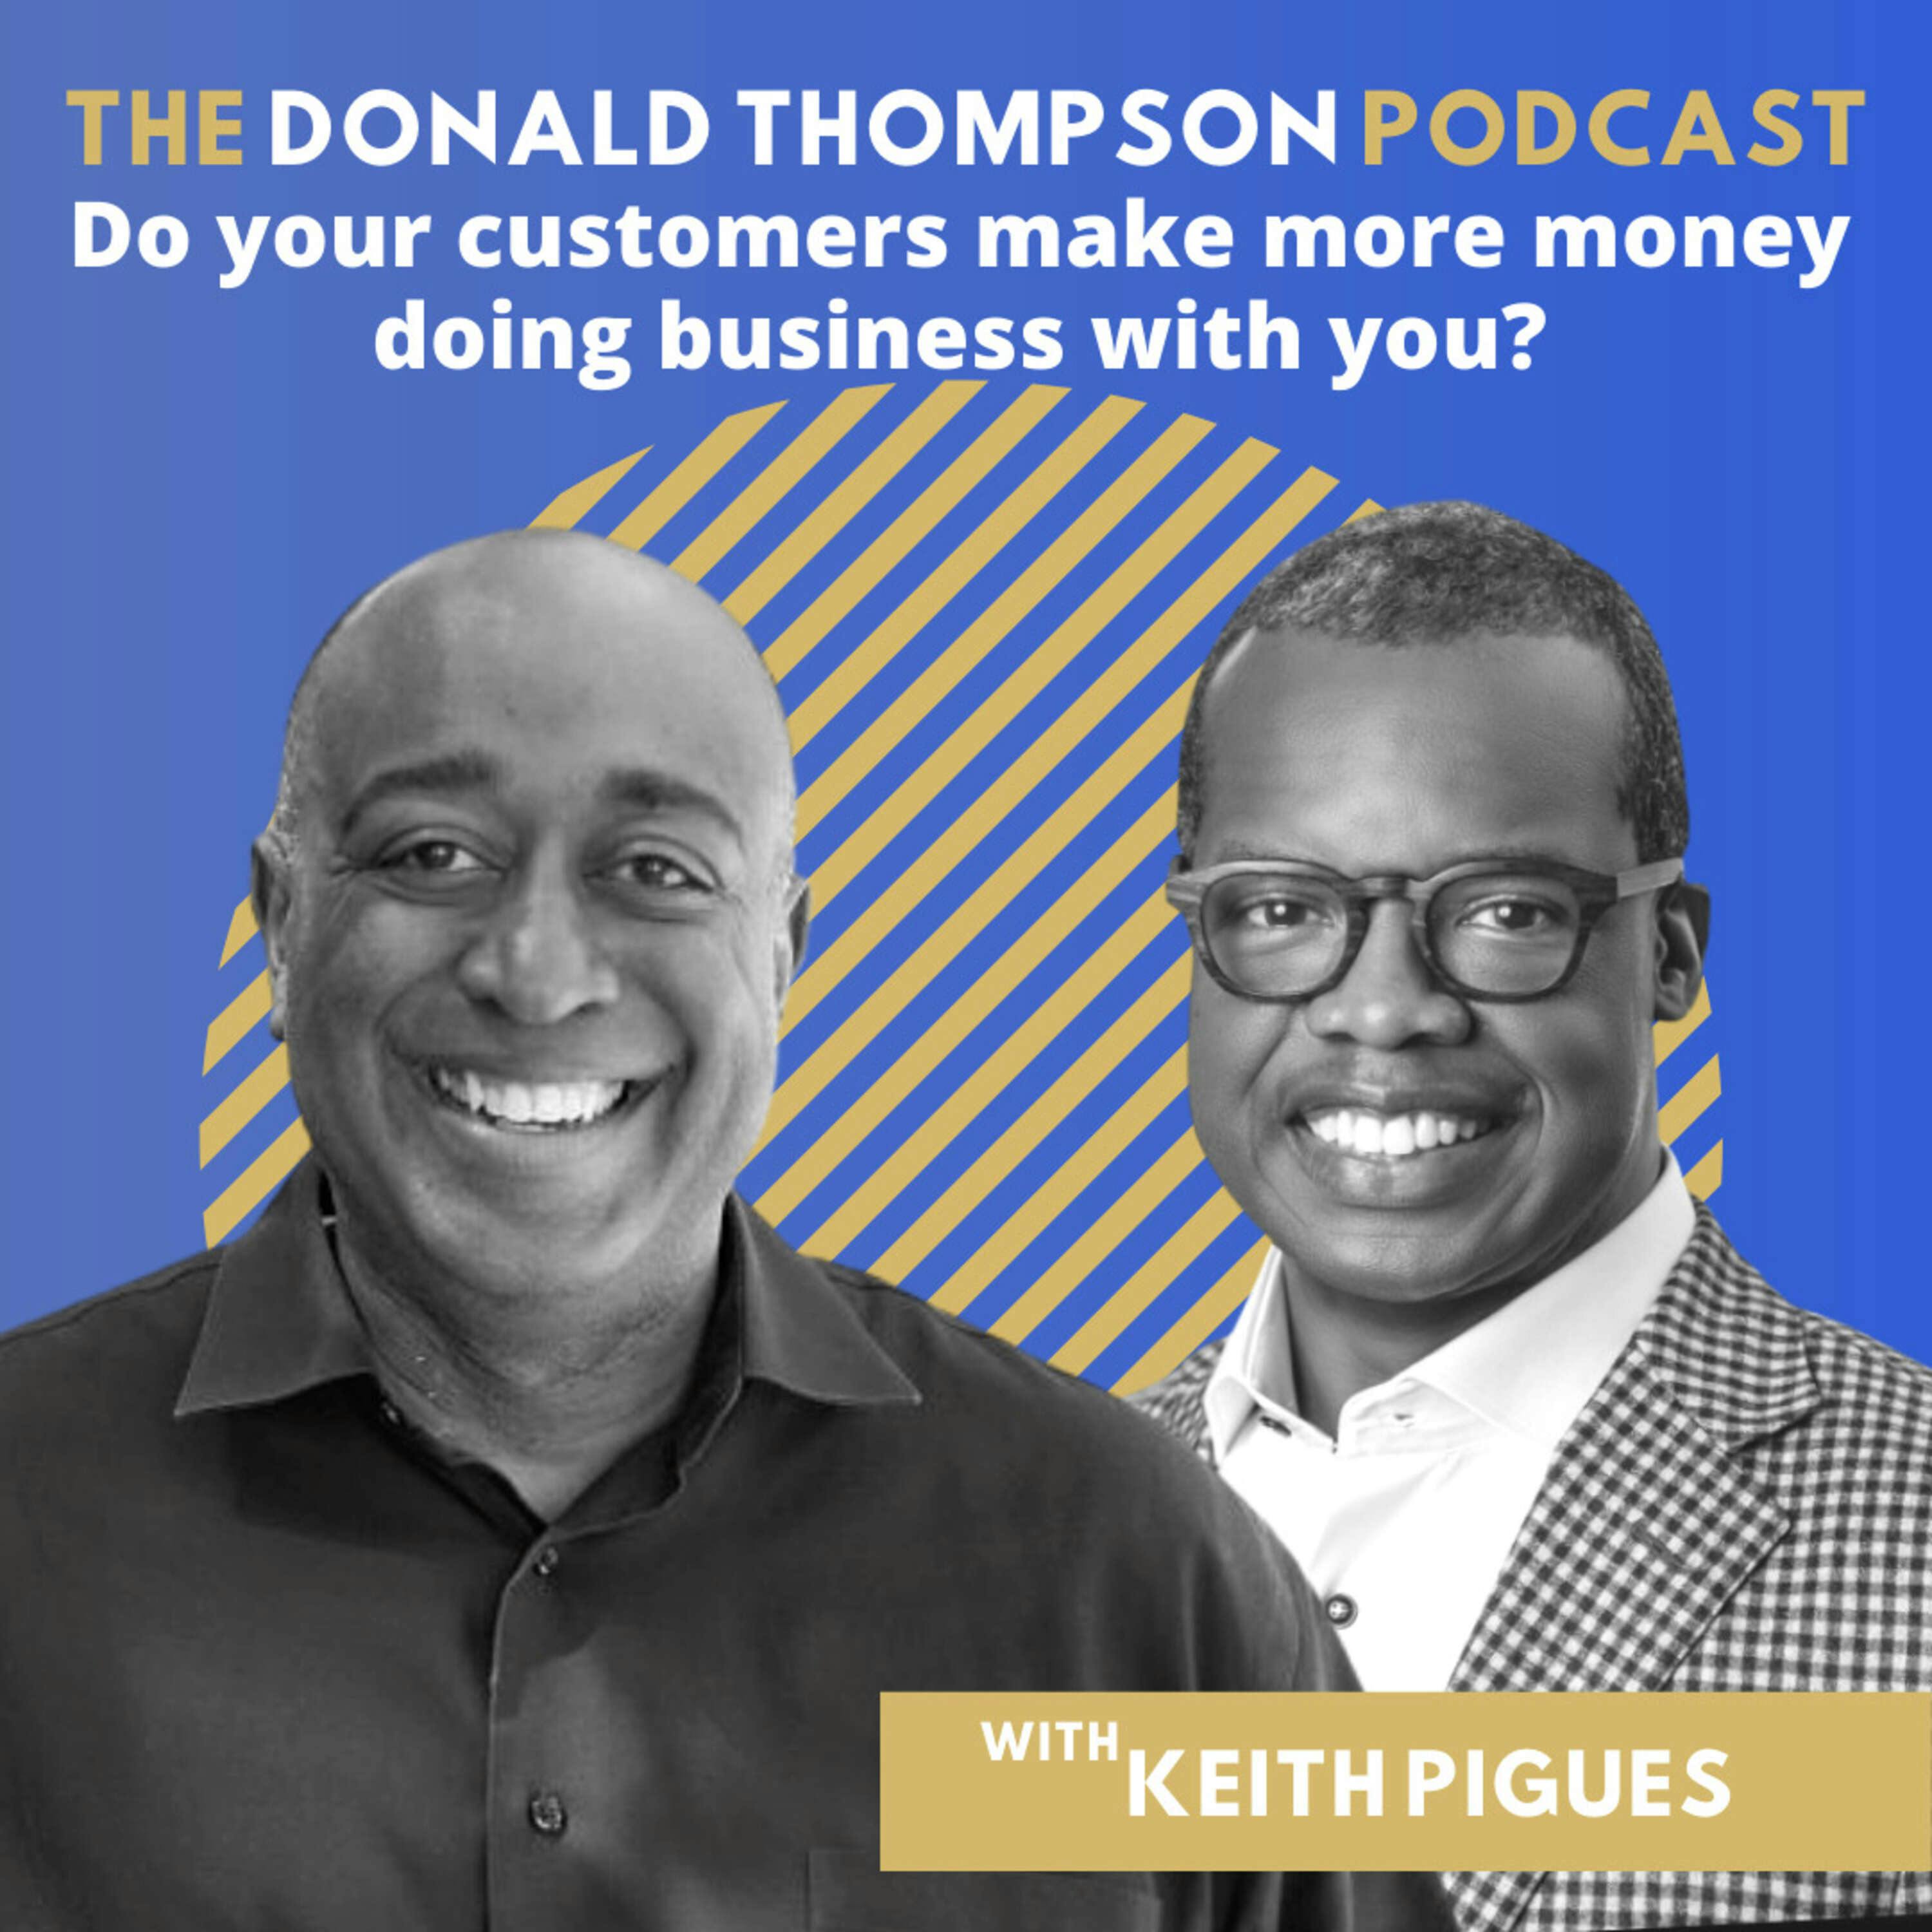 Keith Pigues: Do your customers make more money doing business with you?